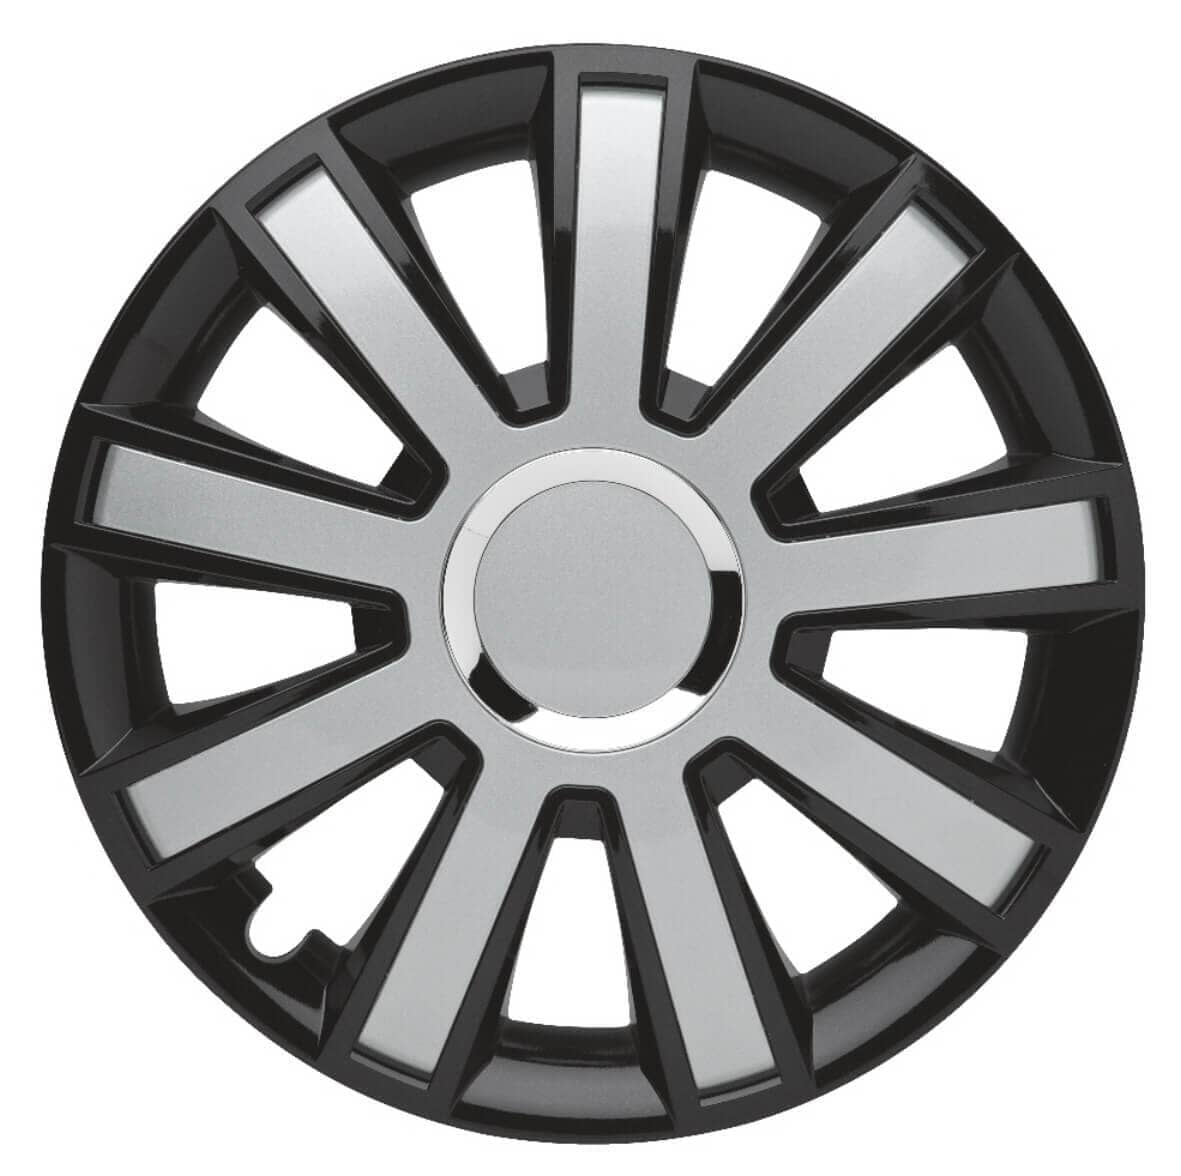 Kuglo hubcaps Flash silver gray black 4 pieces